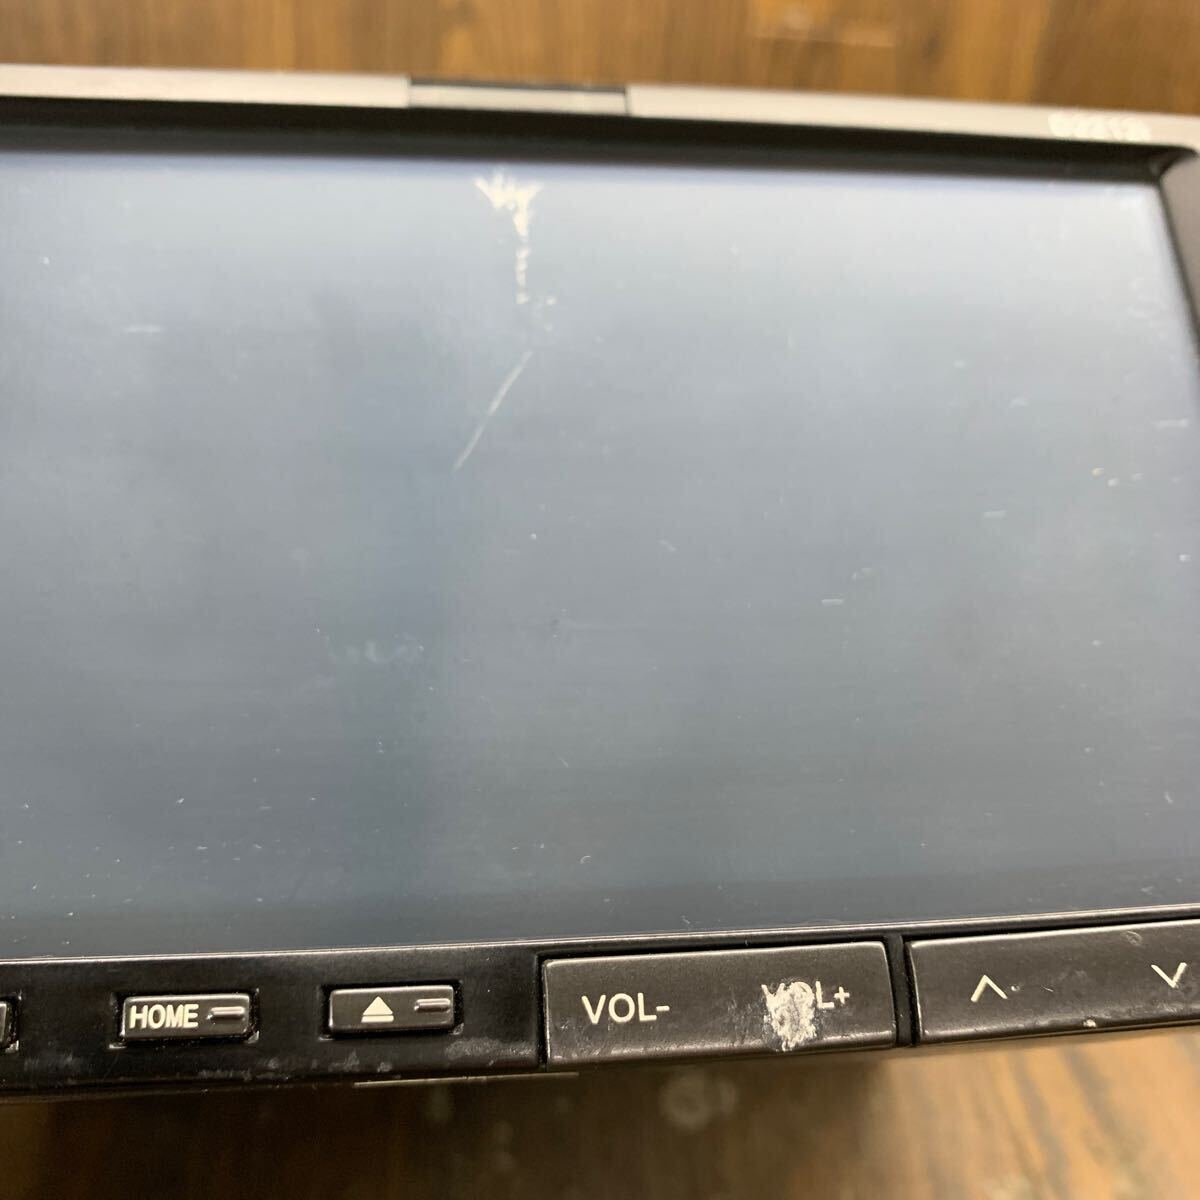 AV4-493 super-discount car stereo DVD player Milion D2212i D2212I-LE0263 CD DVD Bluetooth body only simple operation verification ending used present condition goods 